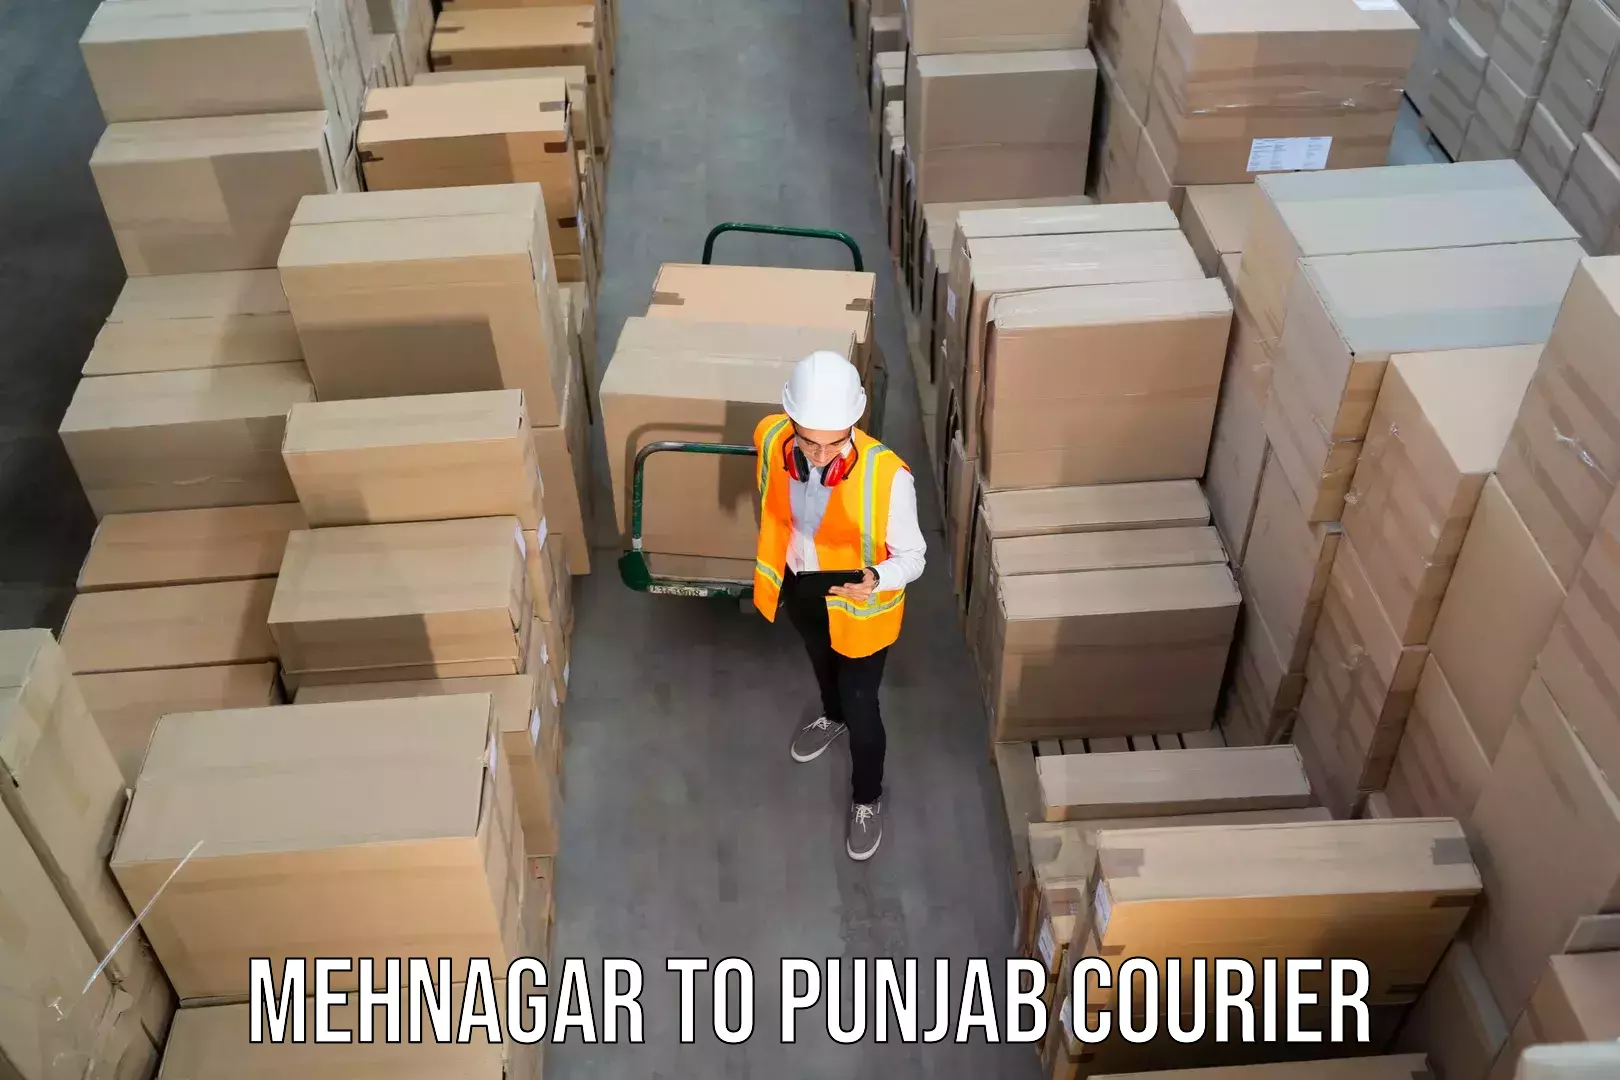 Sustainable courier practices Mehnagar to Punjab